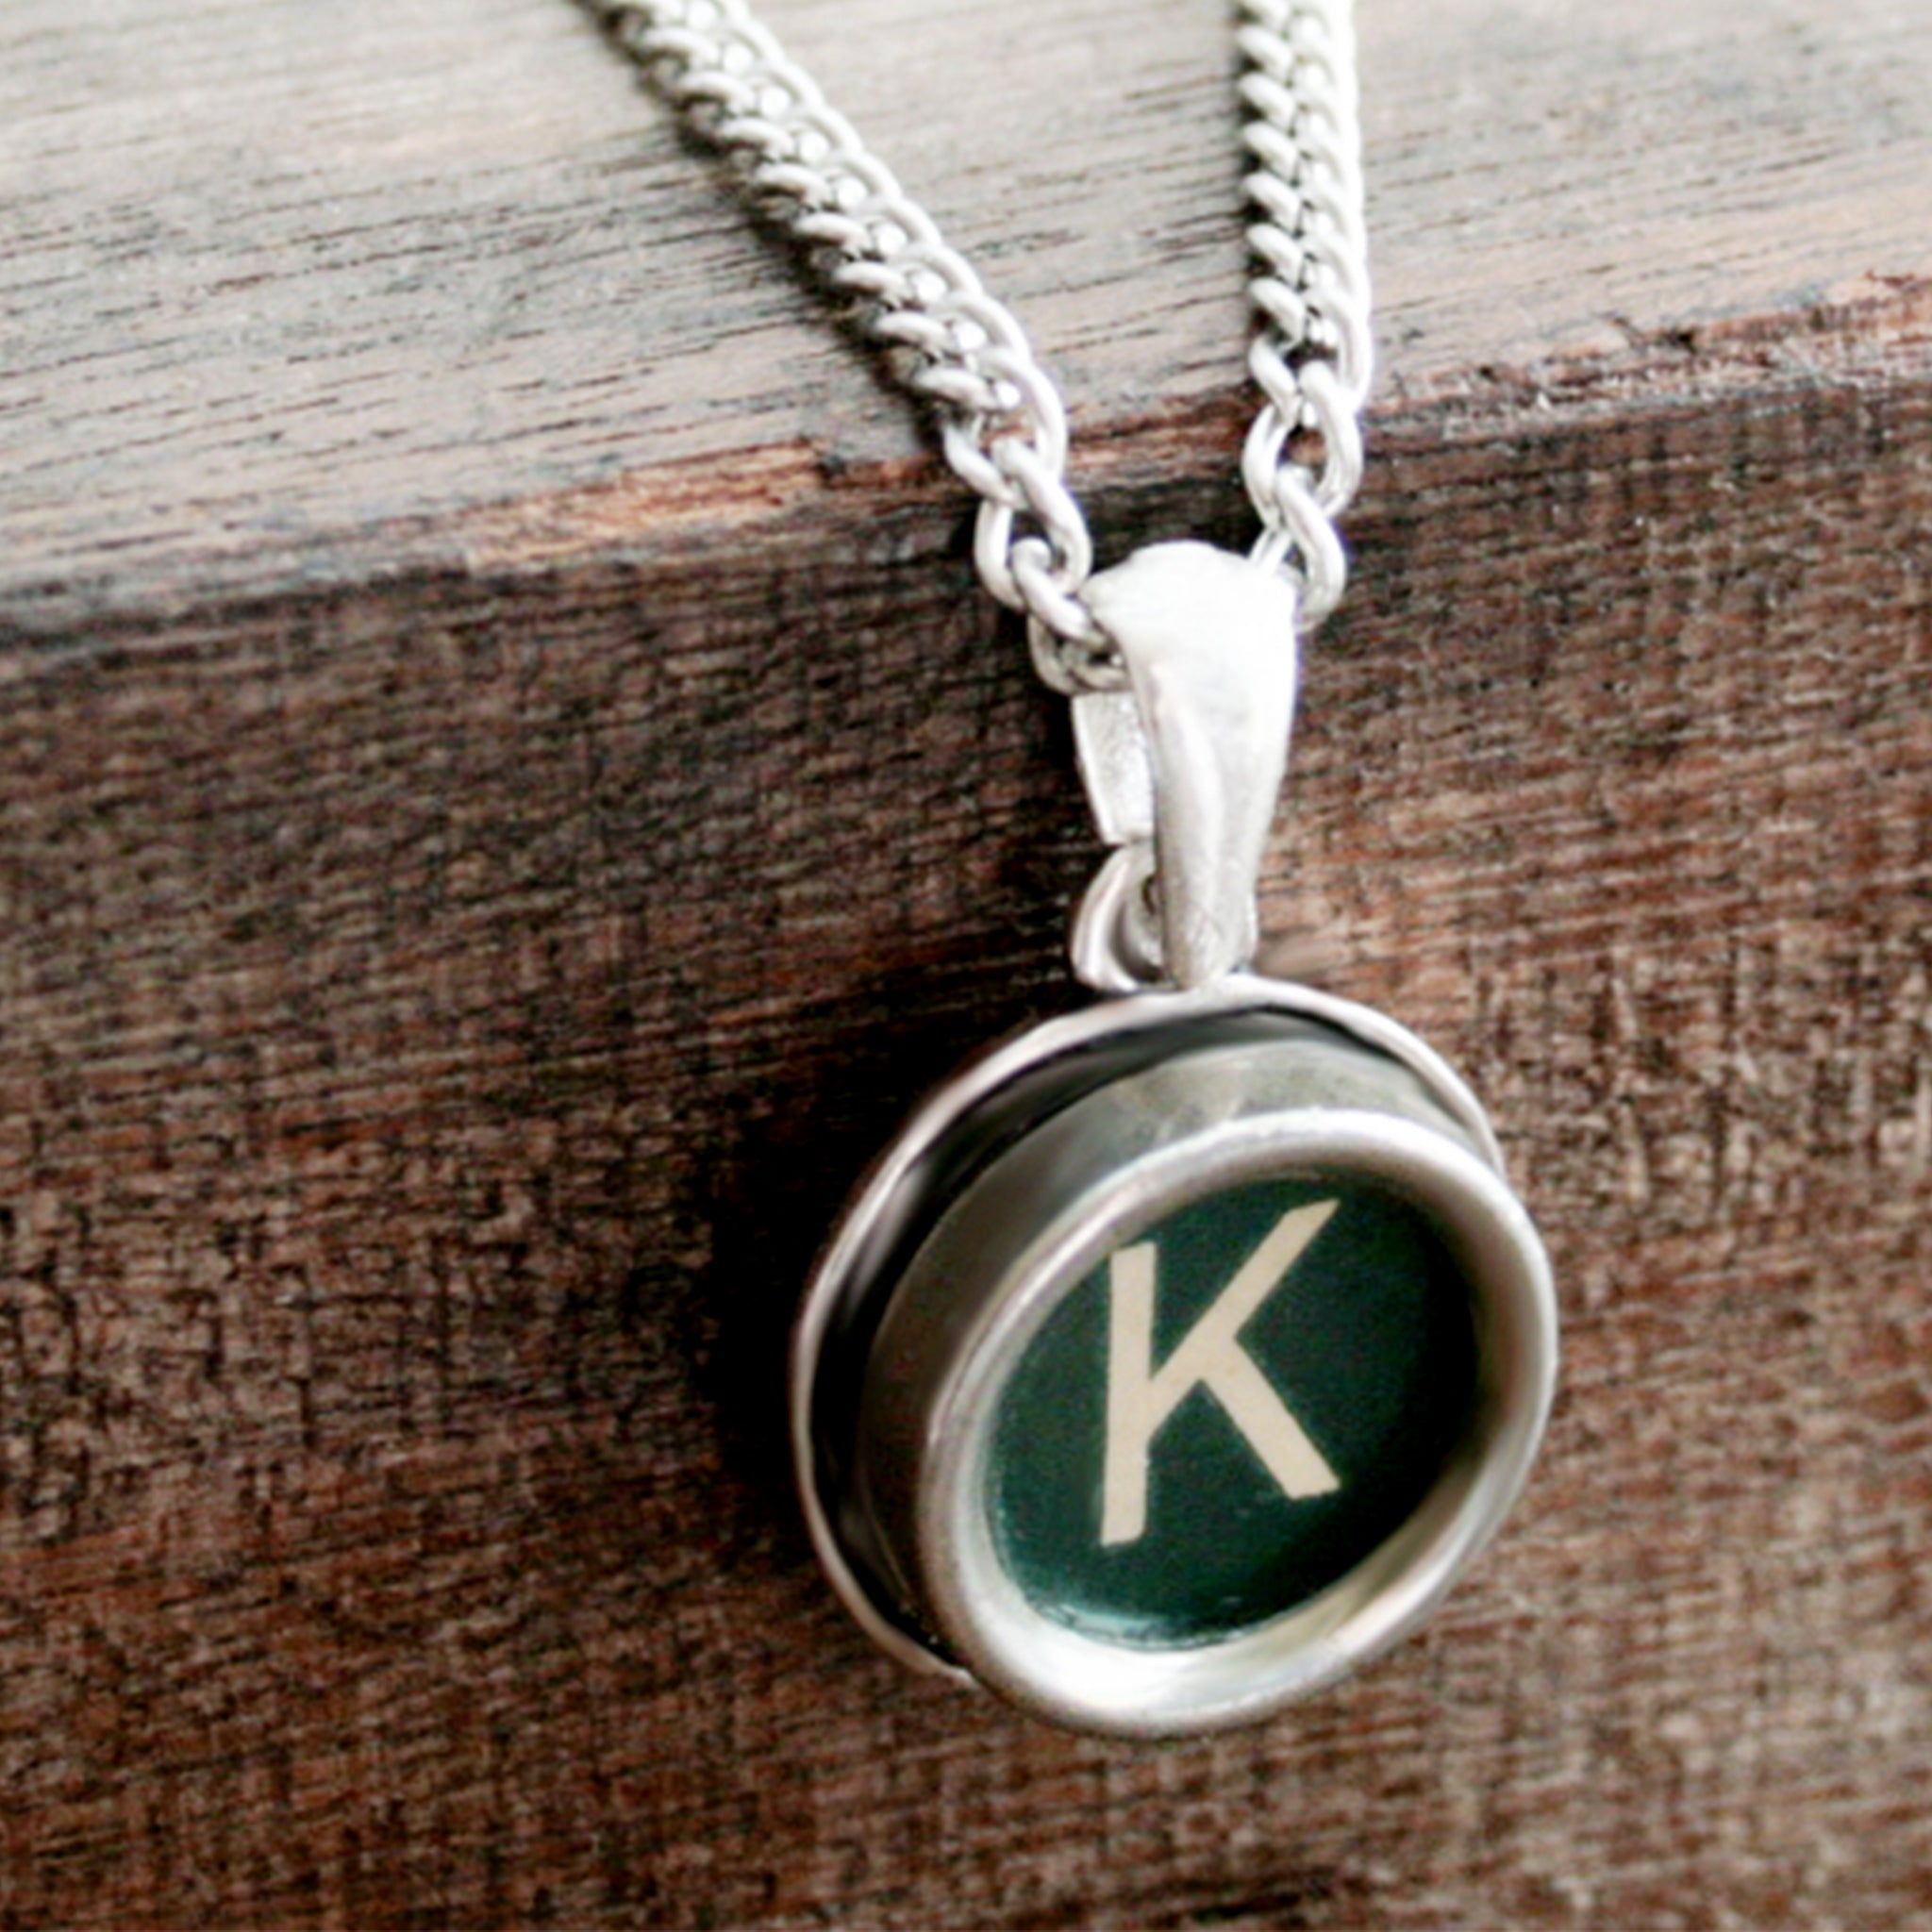 Green K letter necklace made of real typewriter key